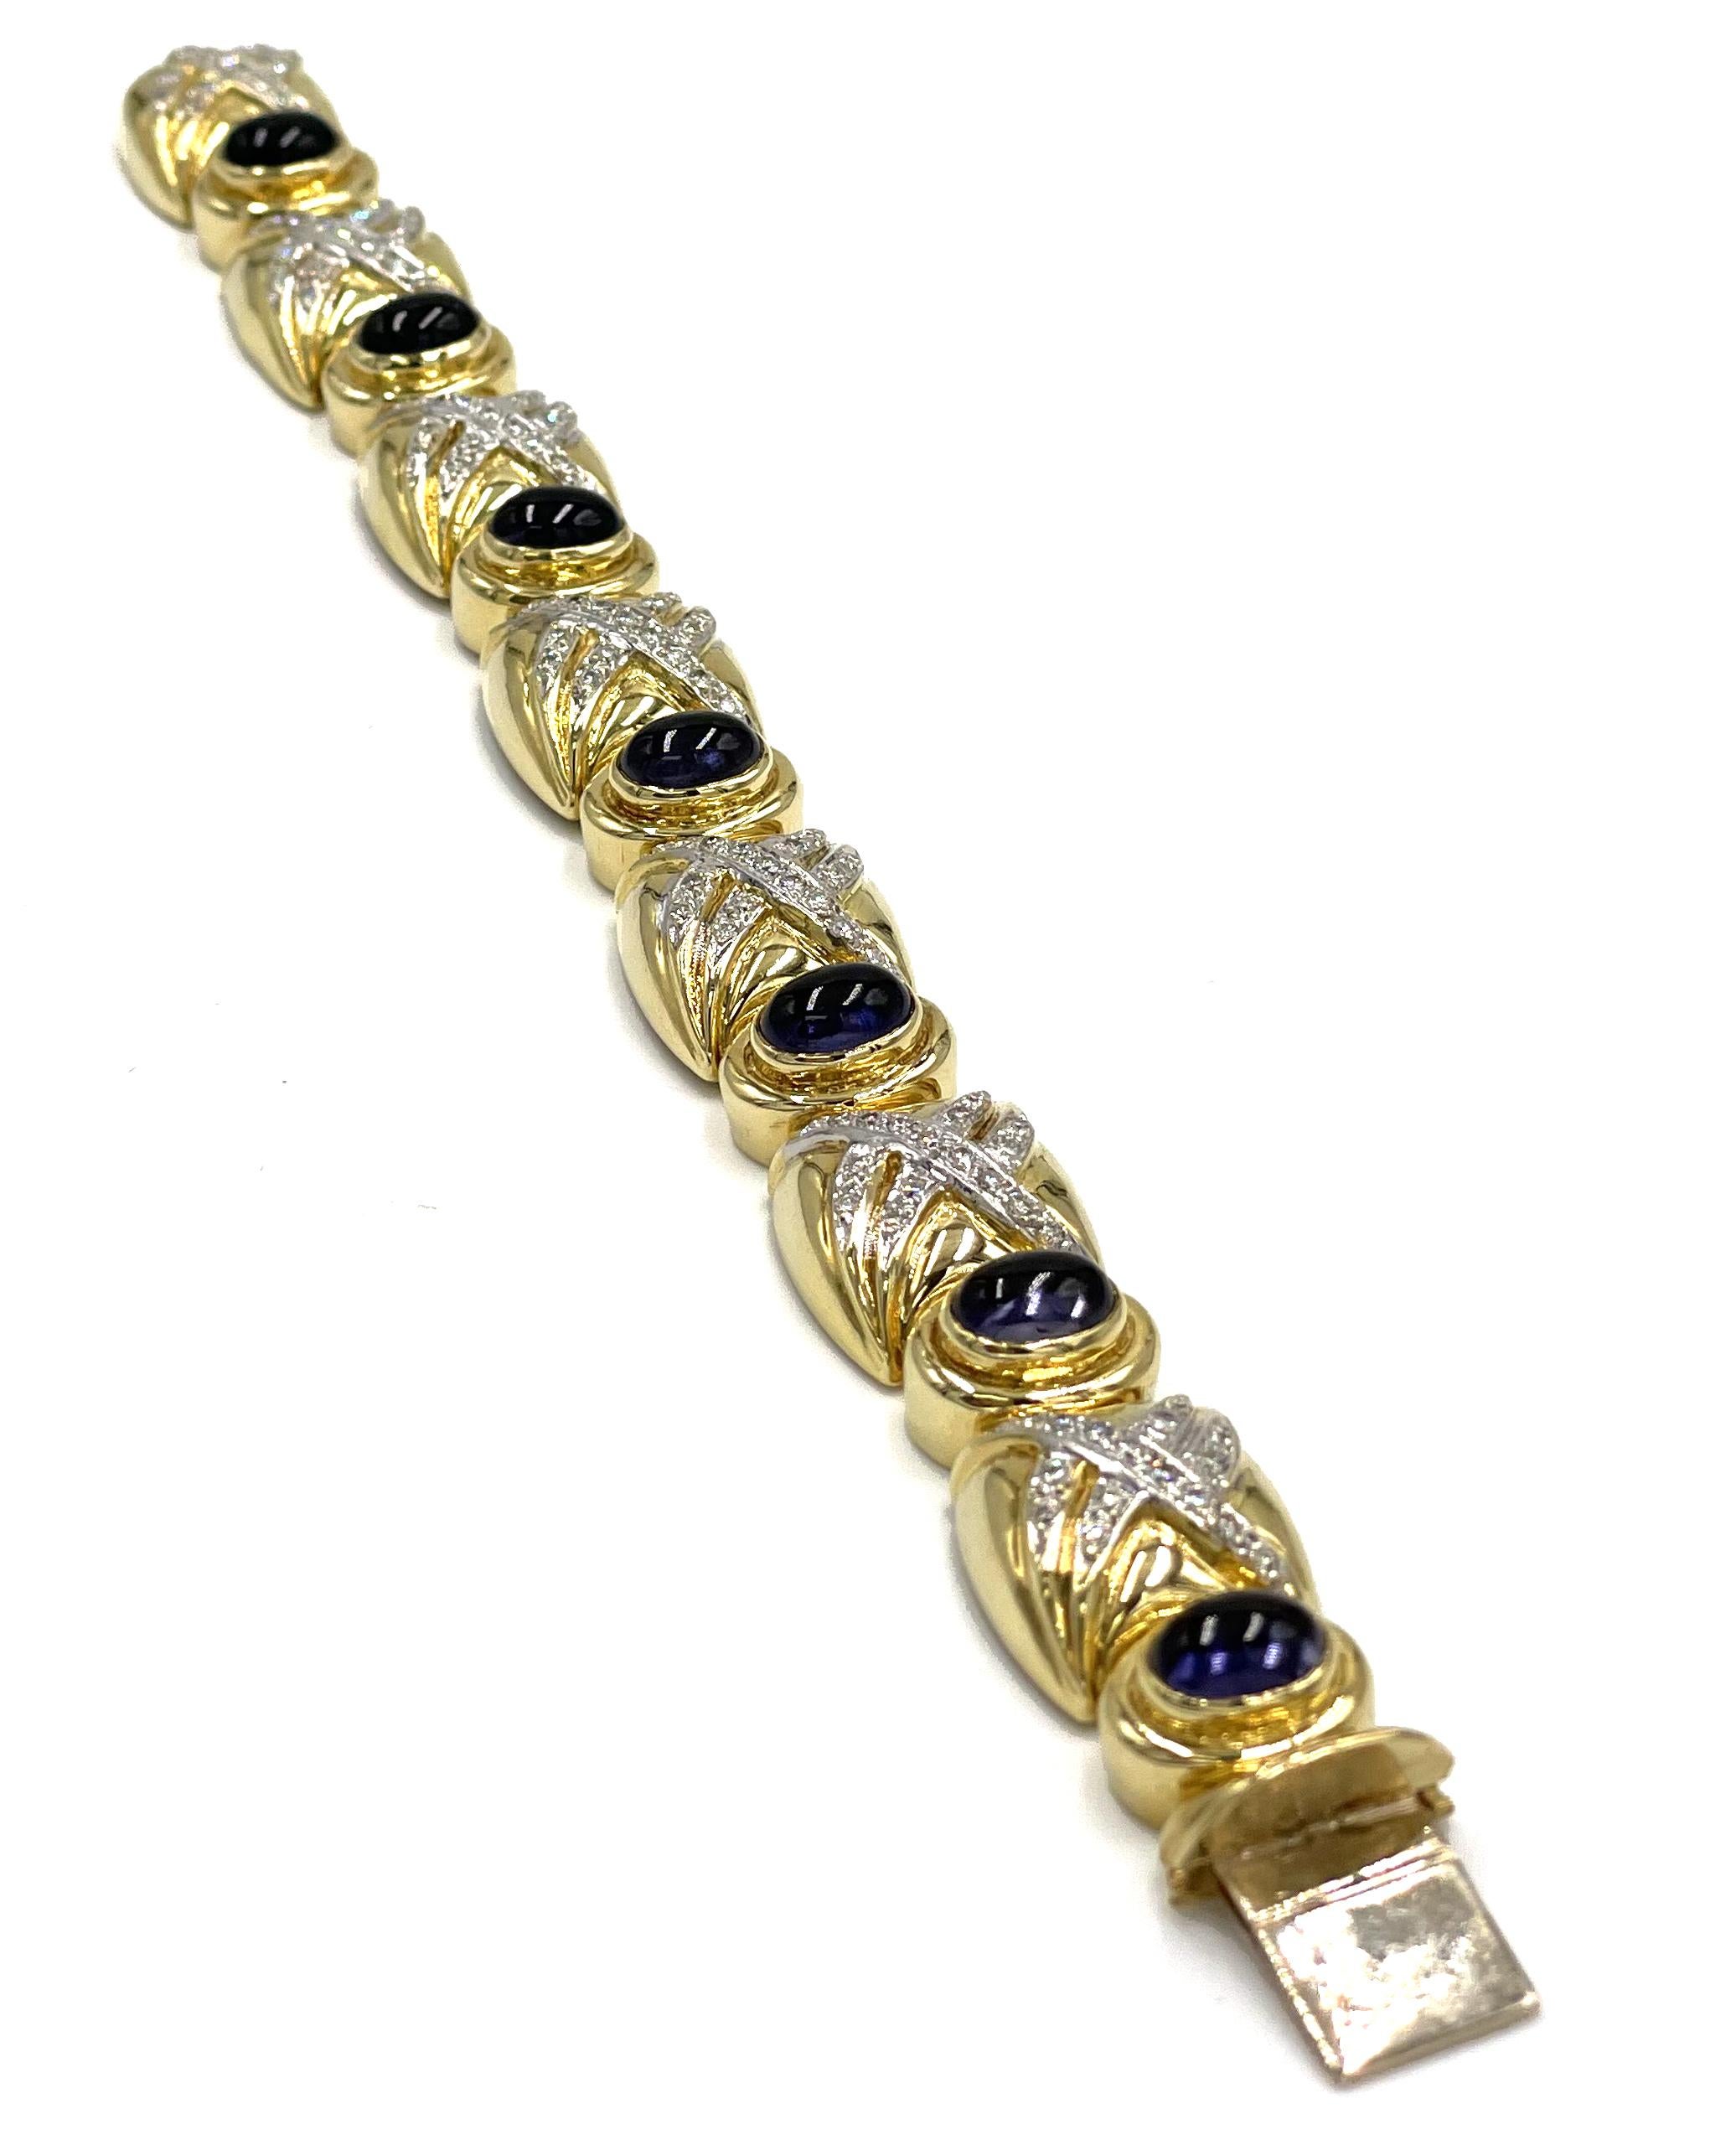 Vintage 18K yellow gold bracelet with 116 round diamonds totaling 1.50 carats (G/H color and VS clarity) and with 7 cabochon-cut iolites 5X7 millimeters each.  Bracelet length is approximately 6.75 inches long and the bracelet width is approximately